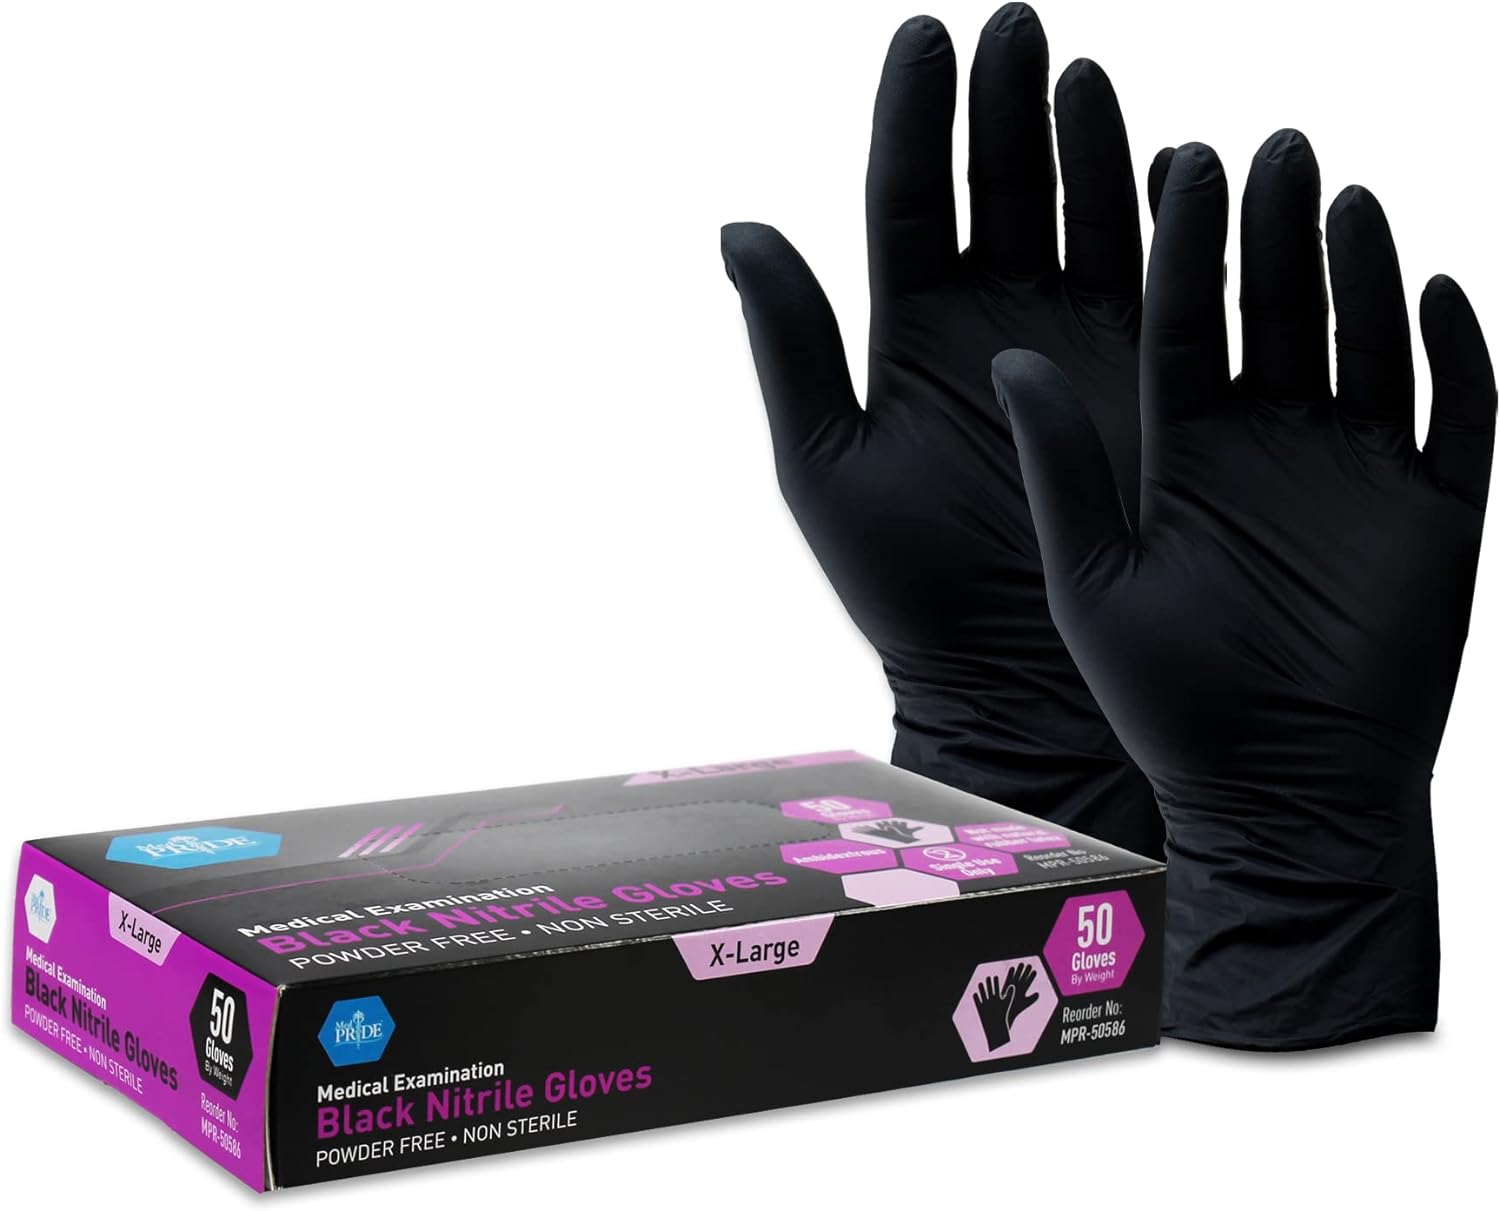 MED PRIDE Black Nitrile Exam Gloves - 4 Mil Thick Disposable LatexPowder-Free - For Surgical, Doctors, Hospital & Home Use